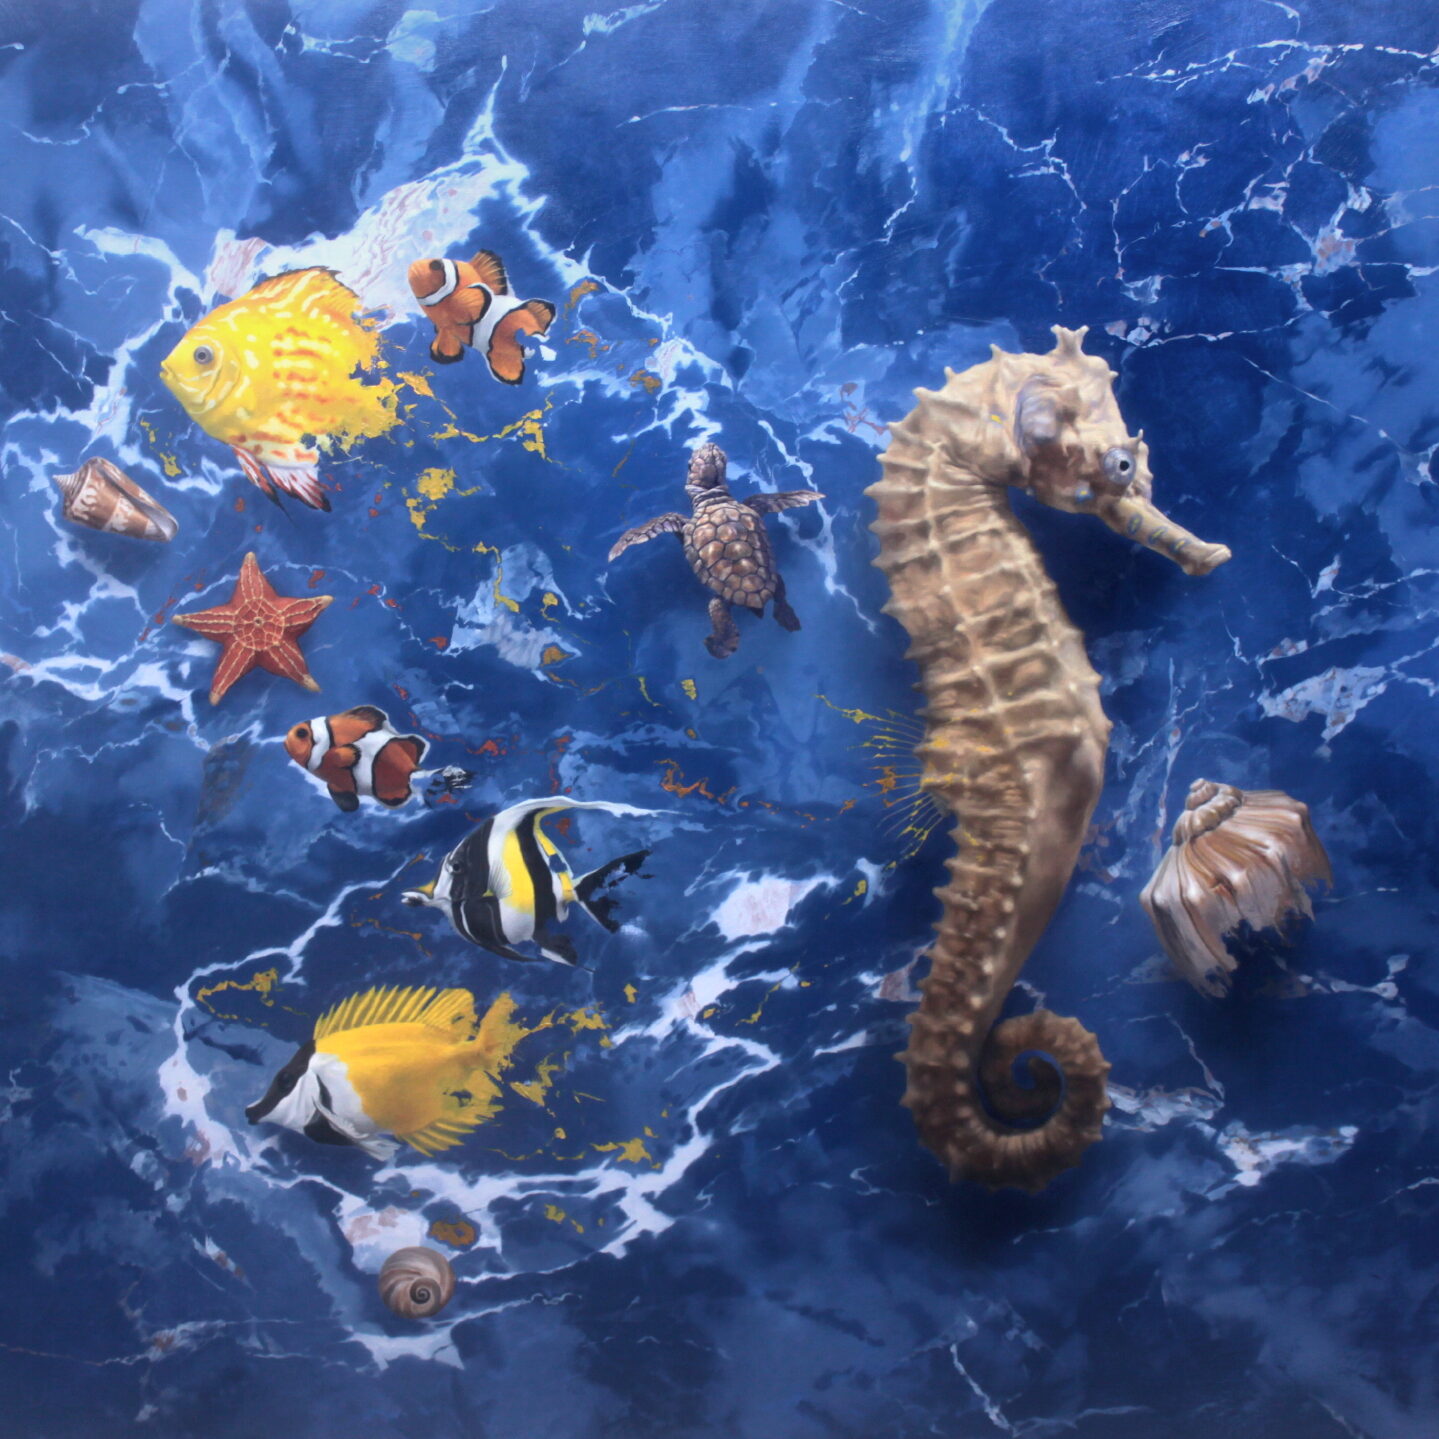 a surrealist painting in 38x32 inches; yellow fish in the top left and bottom left corners, an orange starfish in the middle, with a large brown seahorse on the right half of the painting. The background is ddep marine blue to look like the ocean.